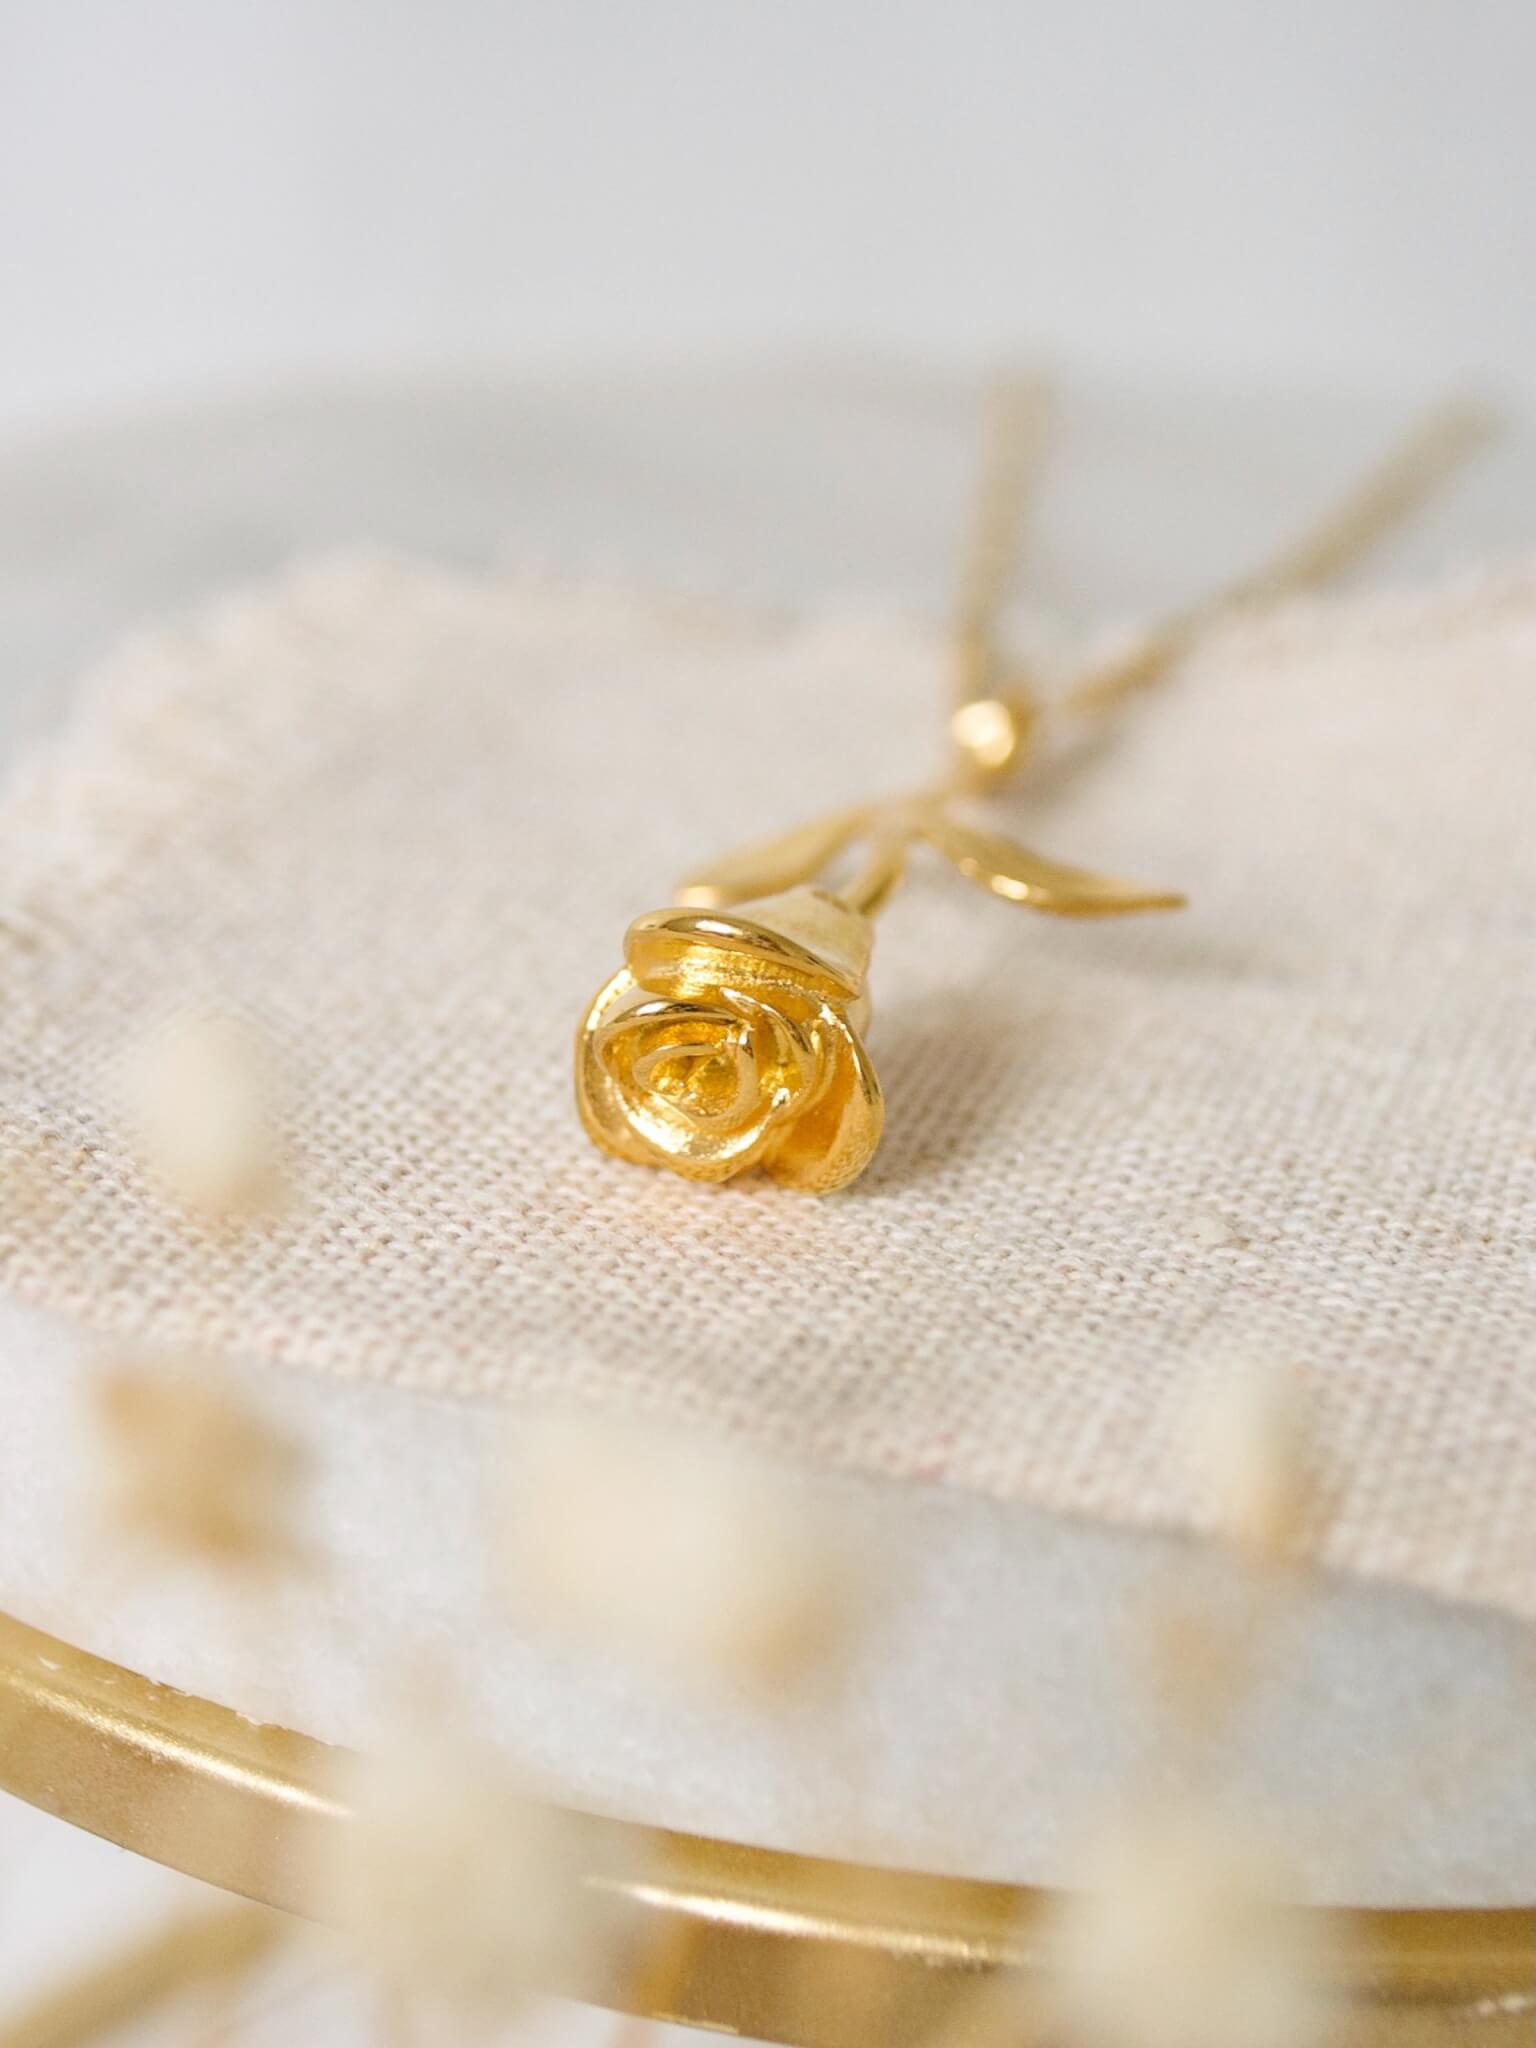 THE ENCHANTED ROSE NECKLACE, GOLD